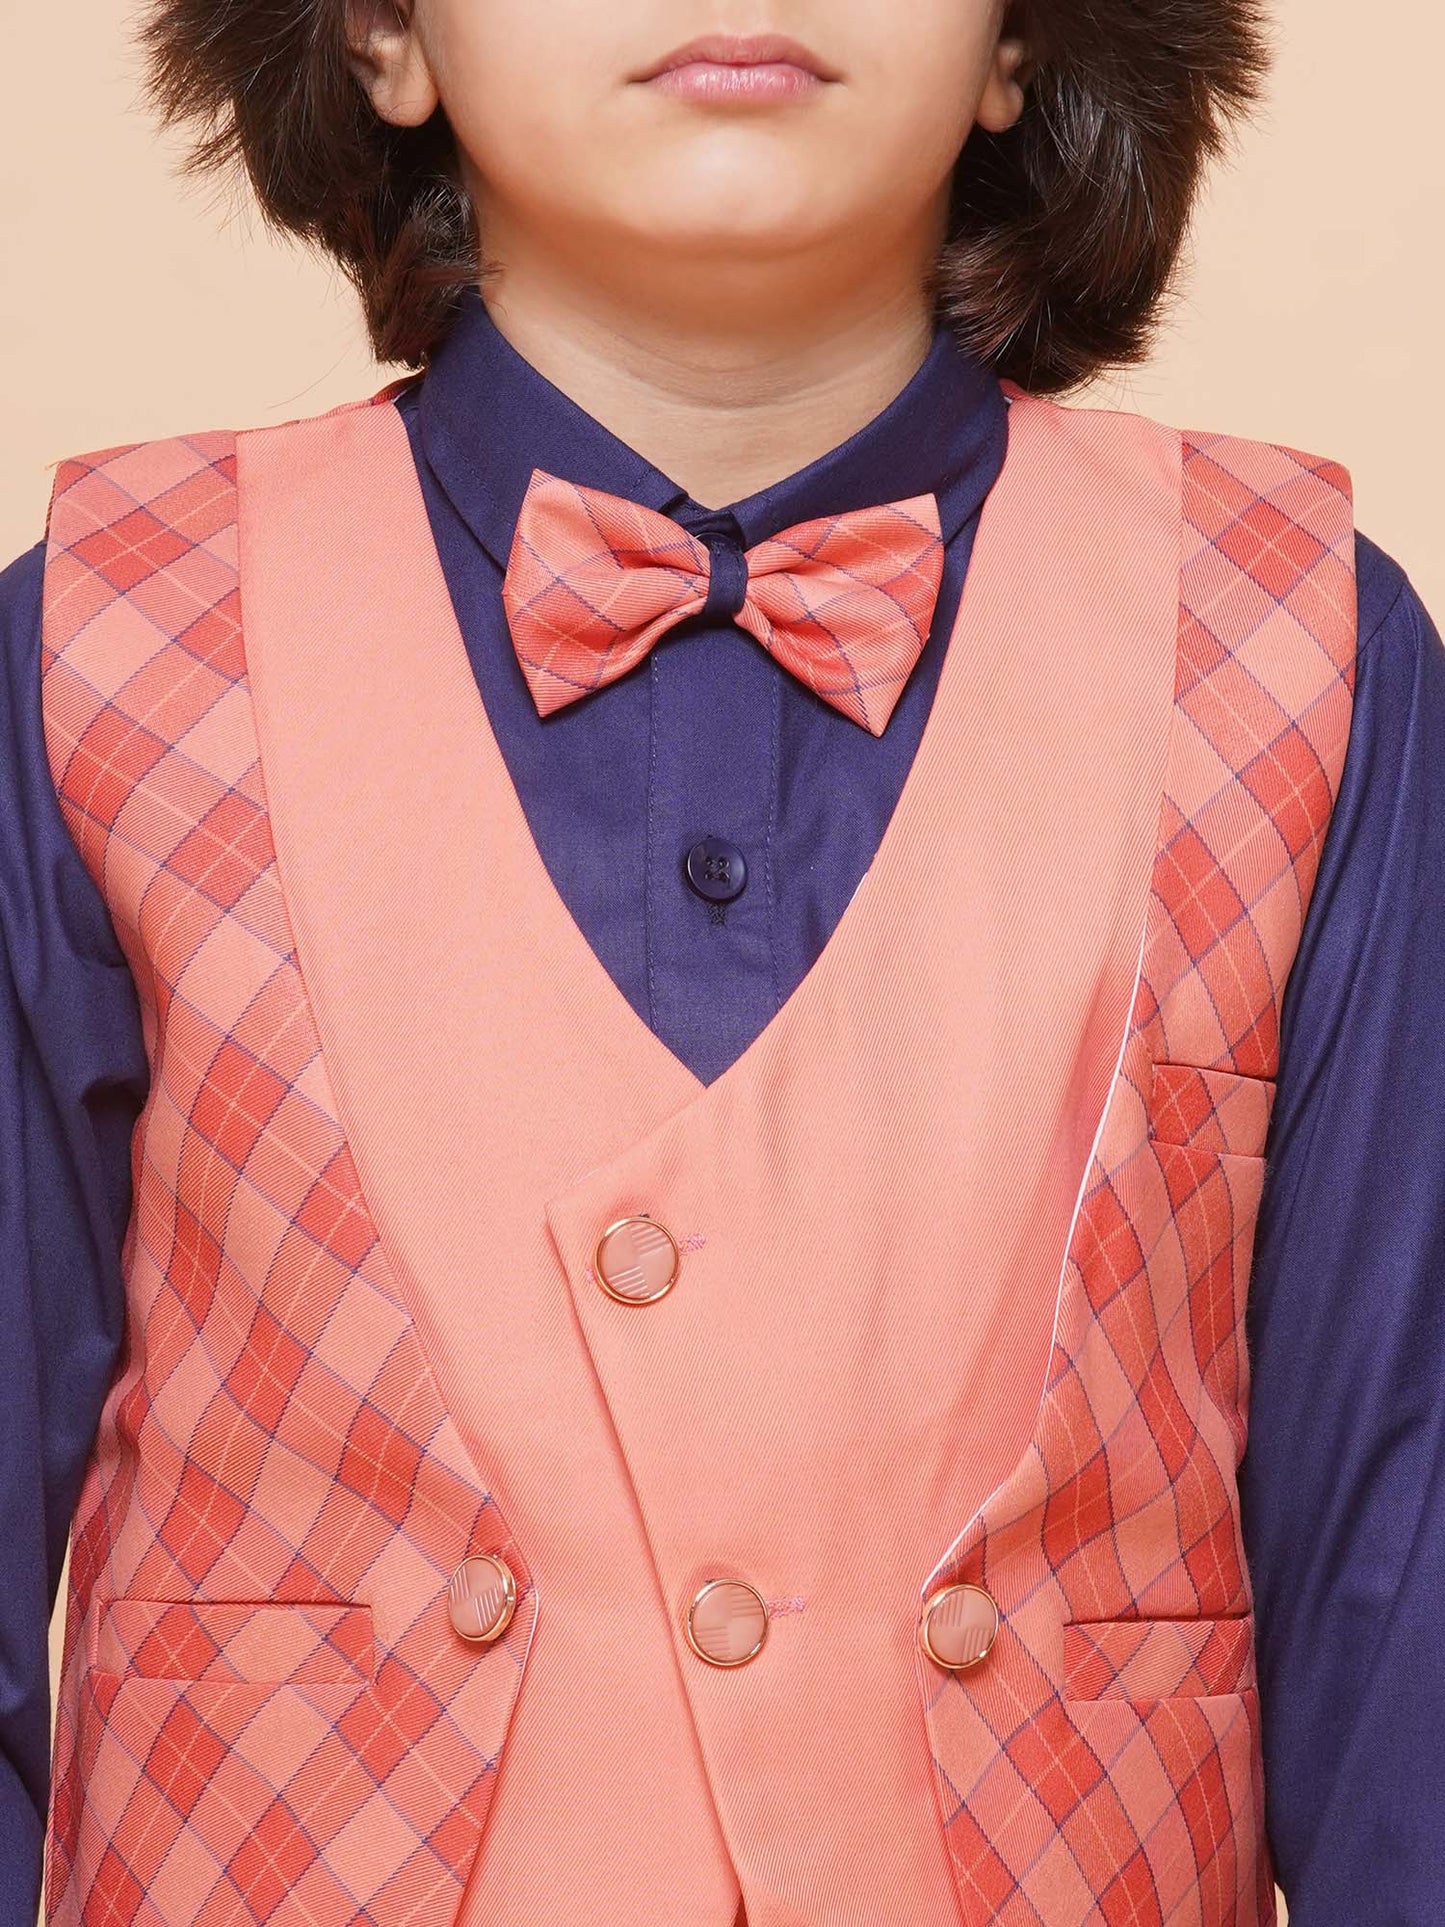 Kids Peach Suiting Fabric Checkered Suit Set For Boys